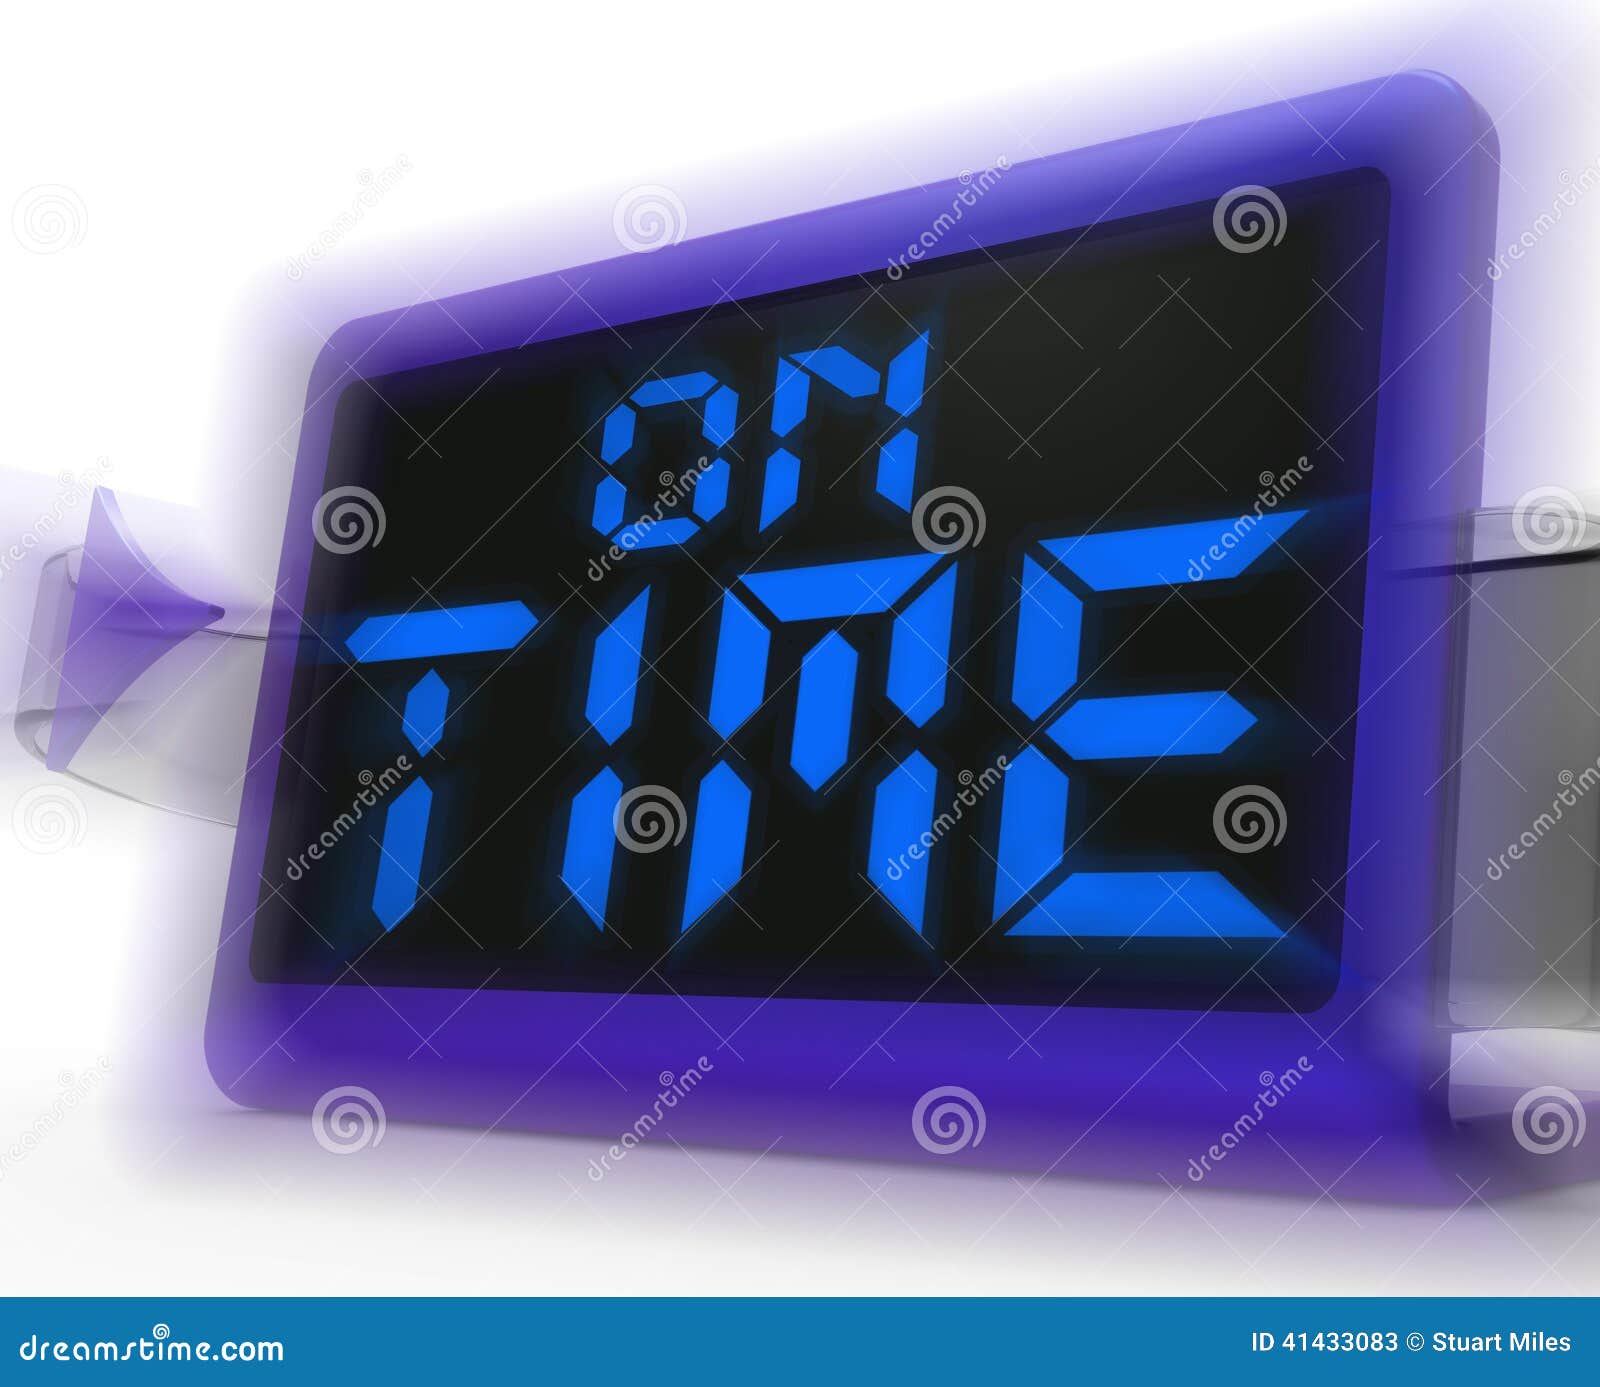 on time digital clock shows punctual and reliable